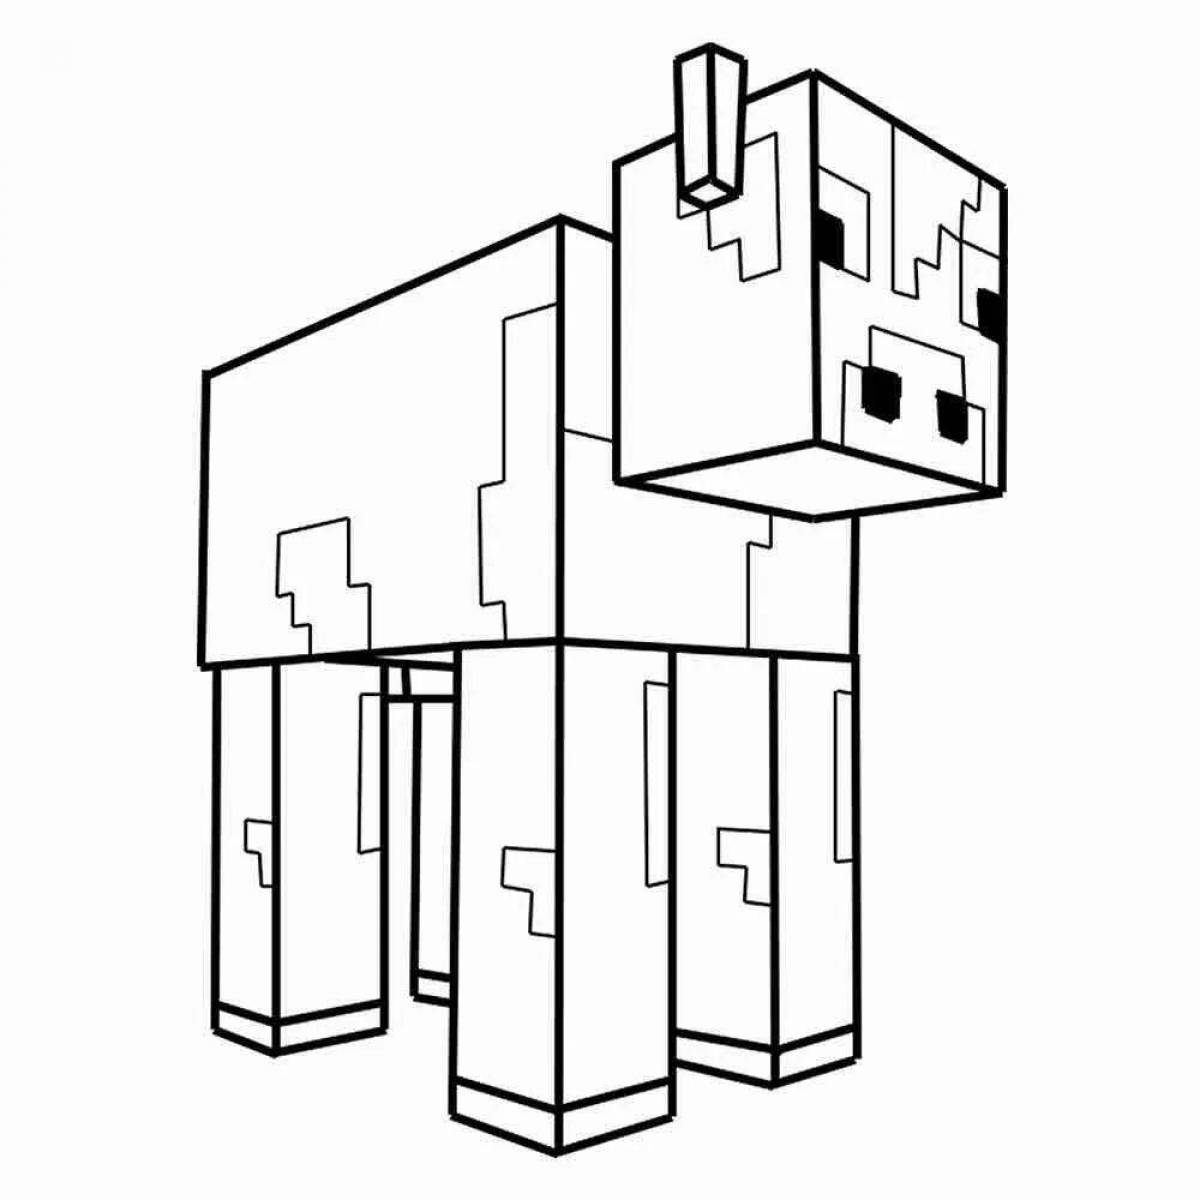 Funny minecraft cow coloring page